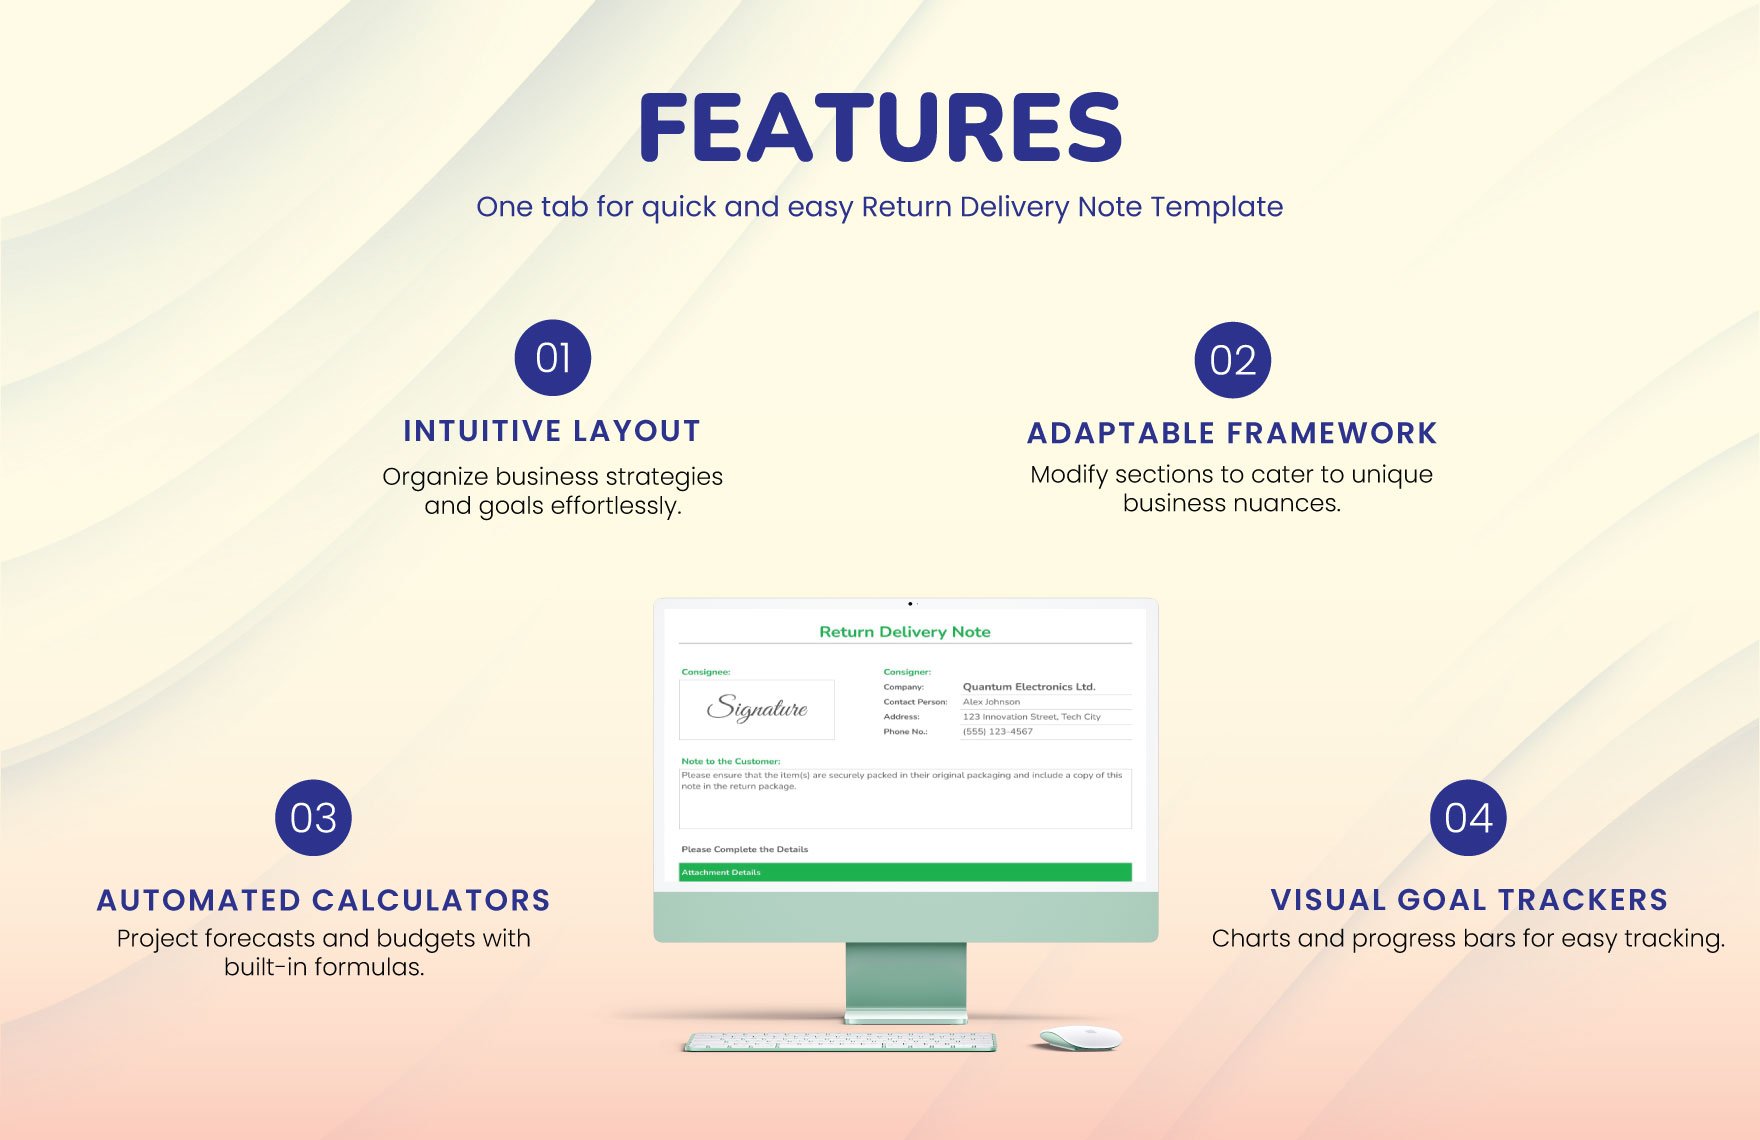 Return Delivery Note Template